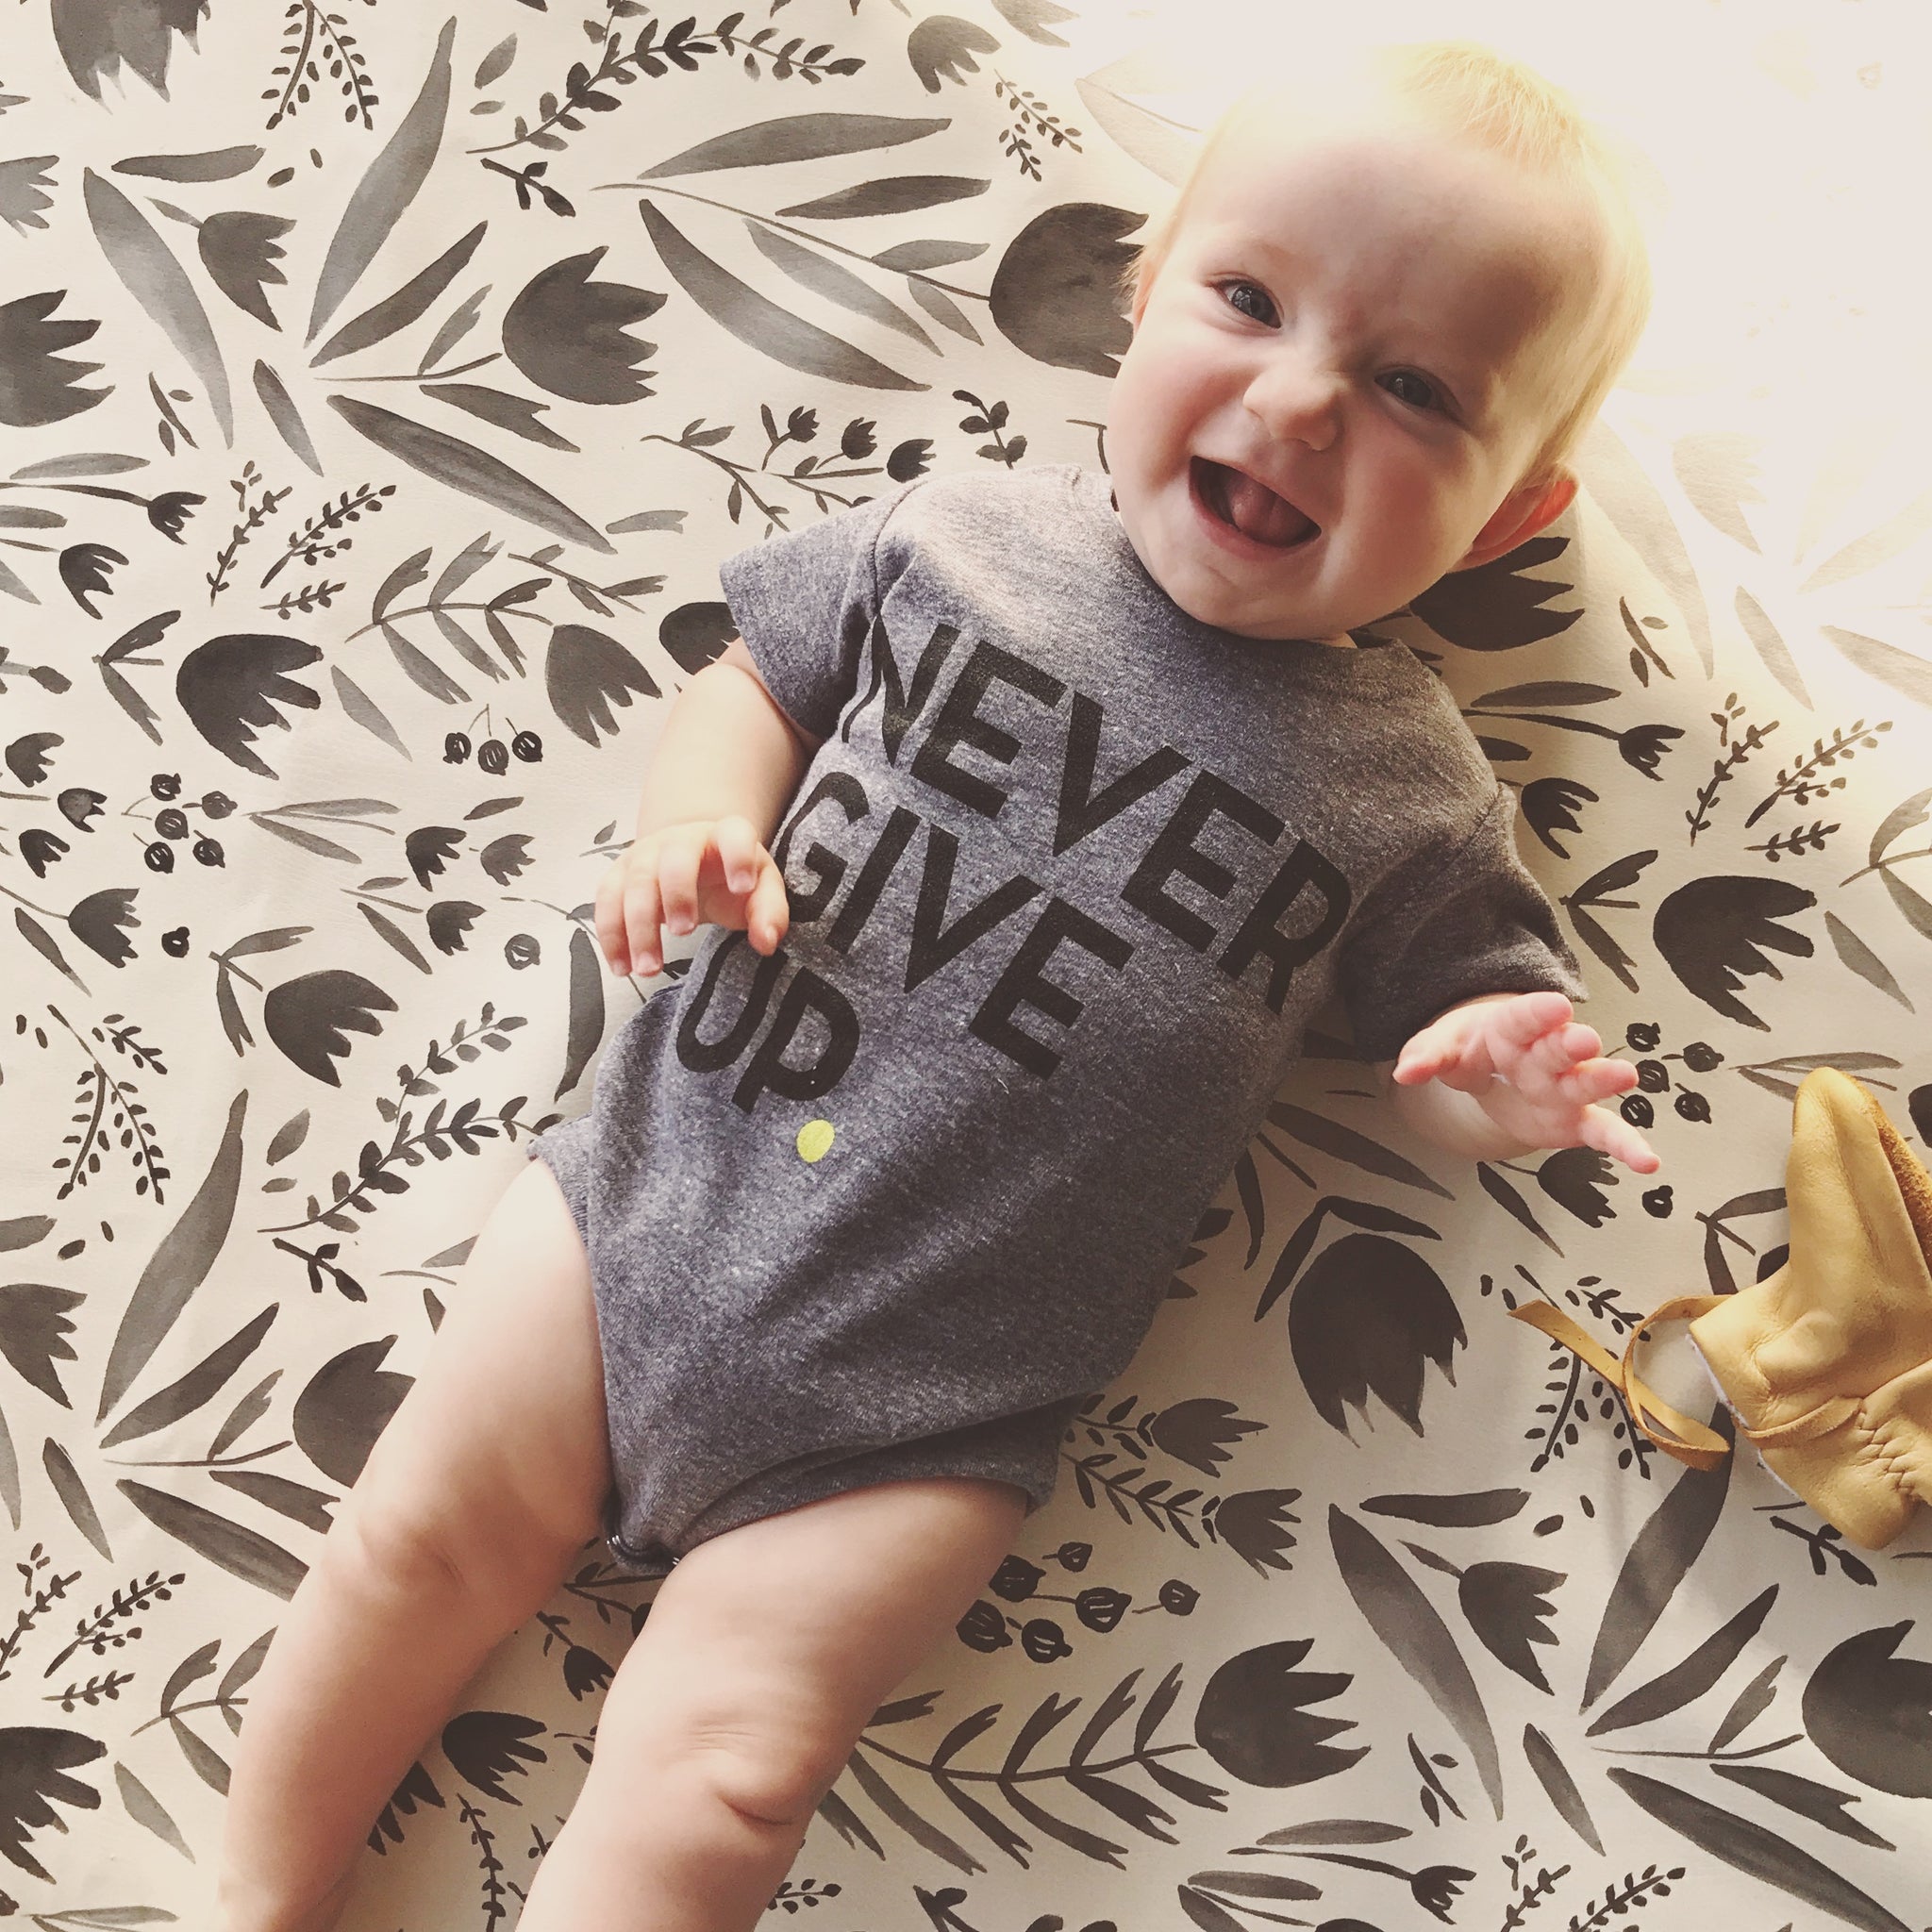 BABY NEVER GIVE UP. ONESIE